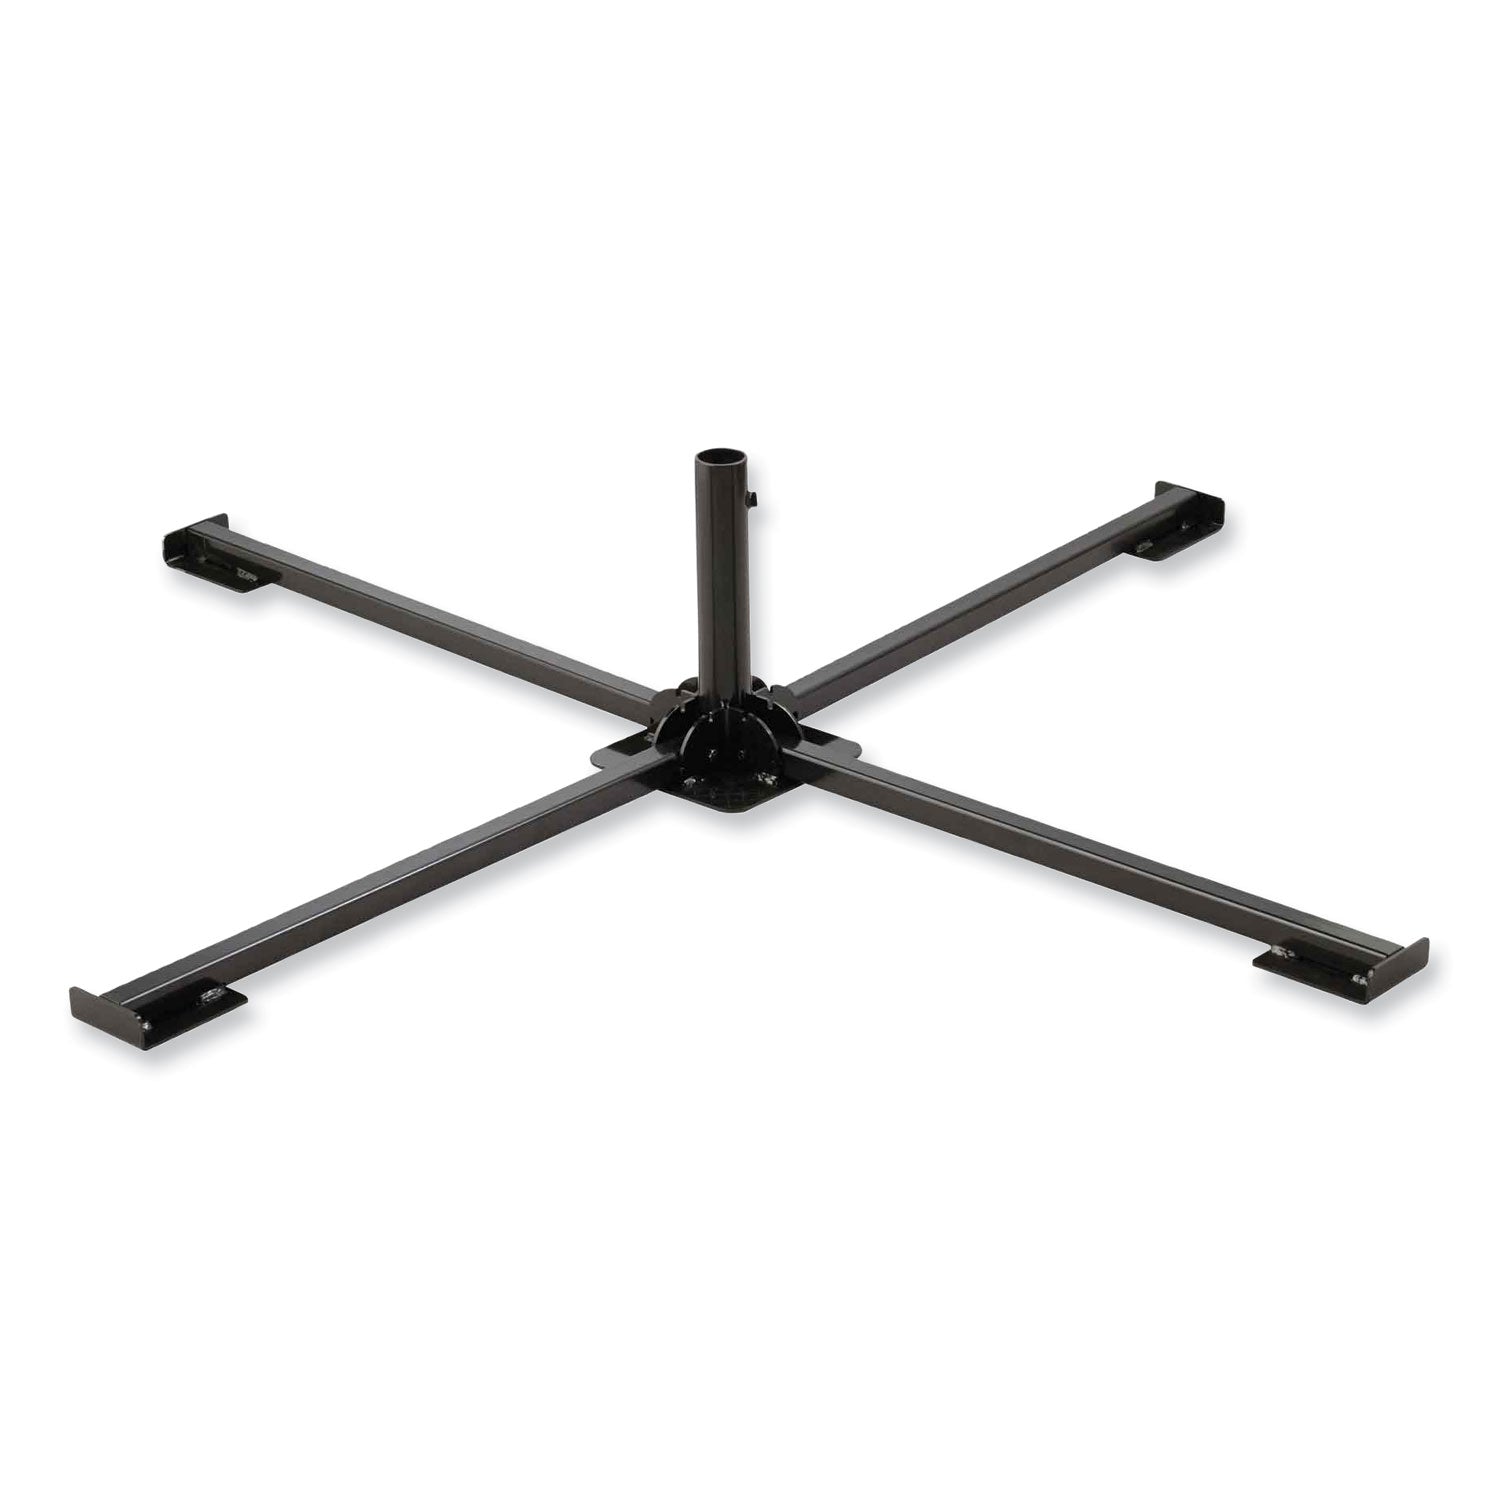 shax-6190-umbrella-stand-165-cylinder-with-set-screw-clamp-metal-48-x-48-x-10-black-ships-in-1-3-business-days_ego12990 - 1